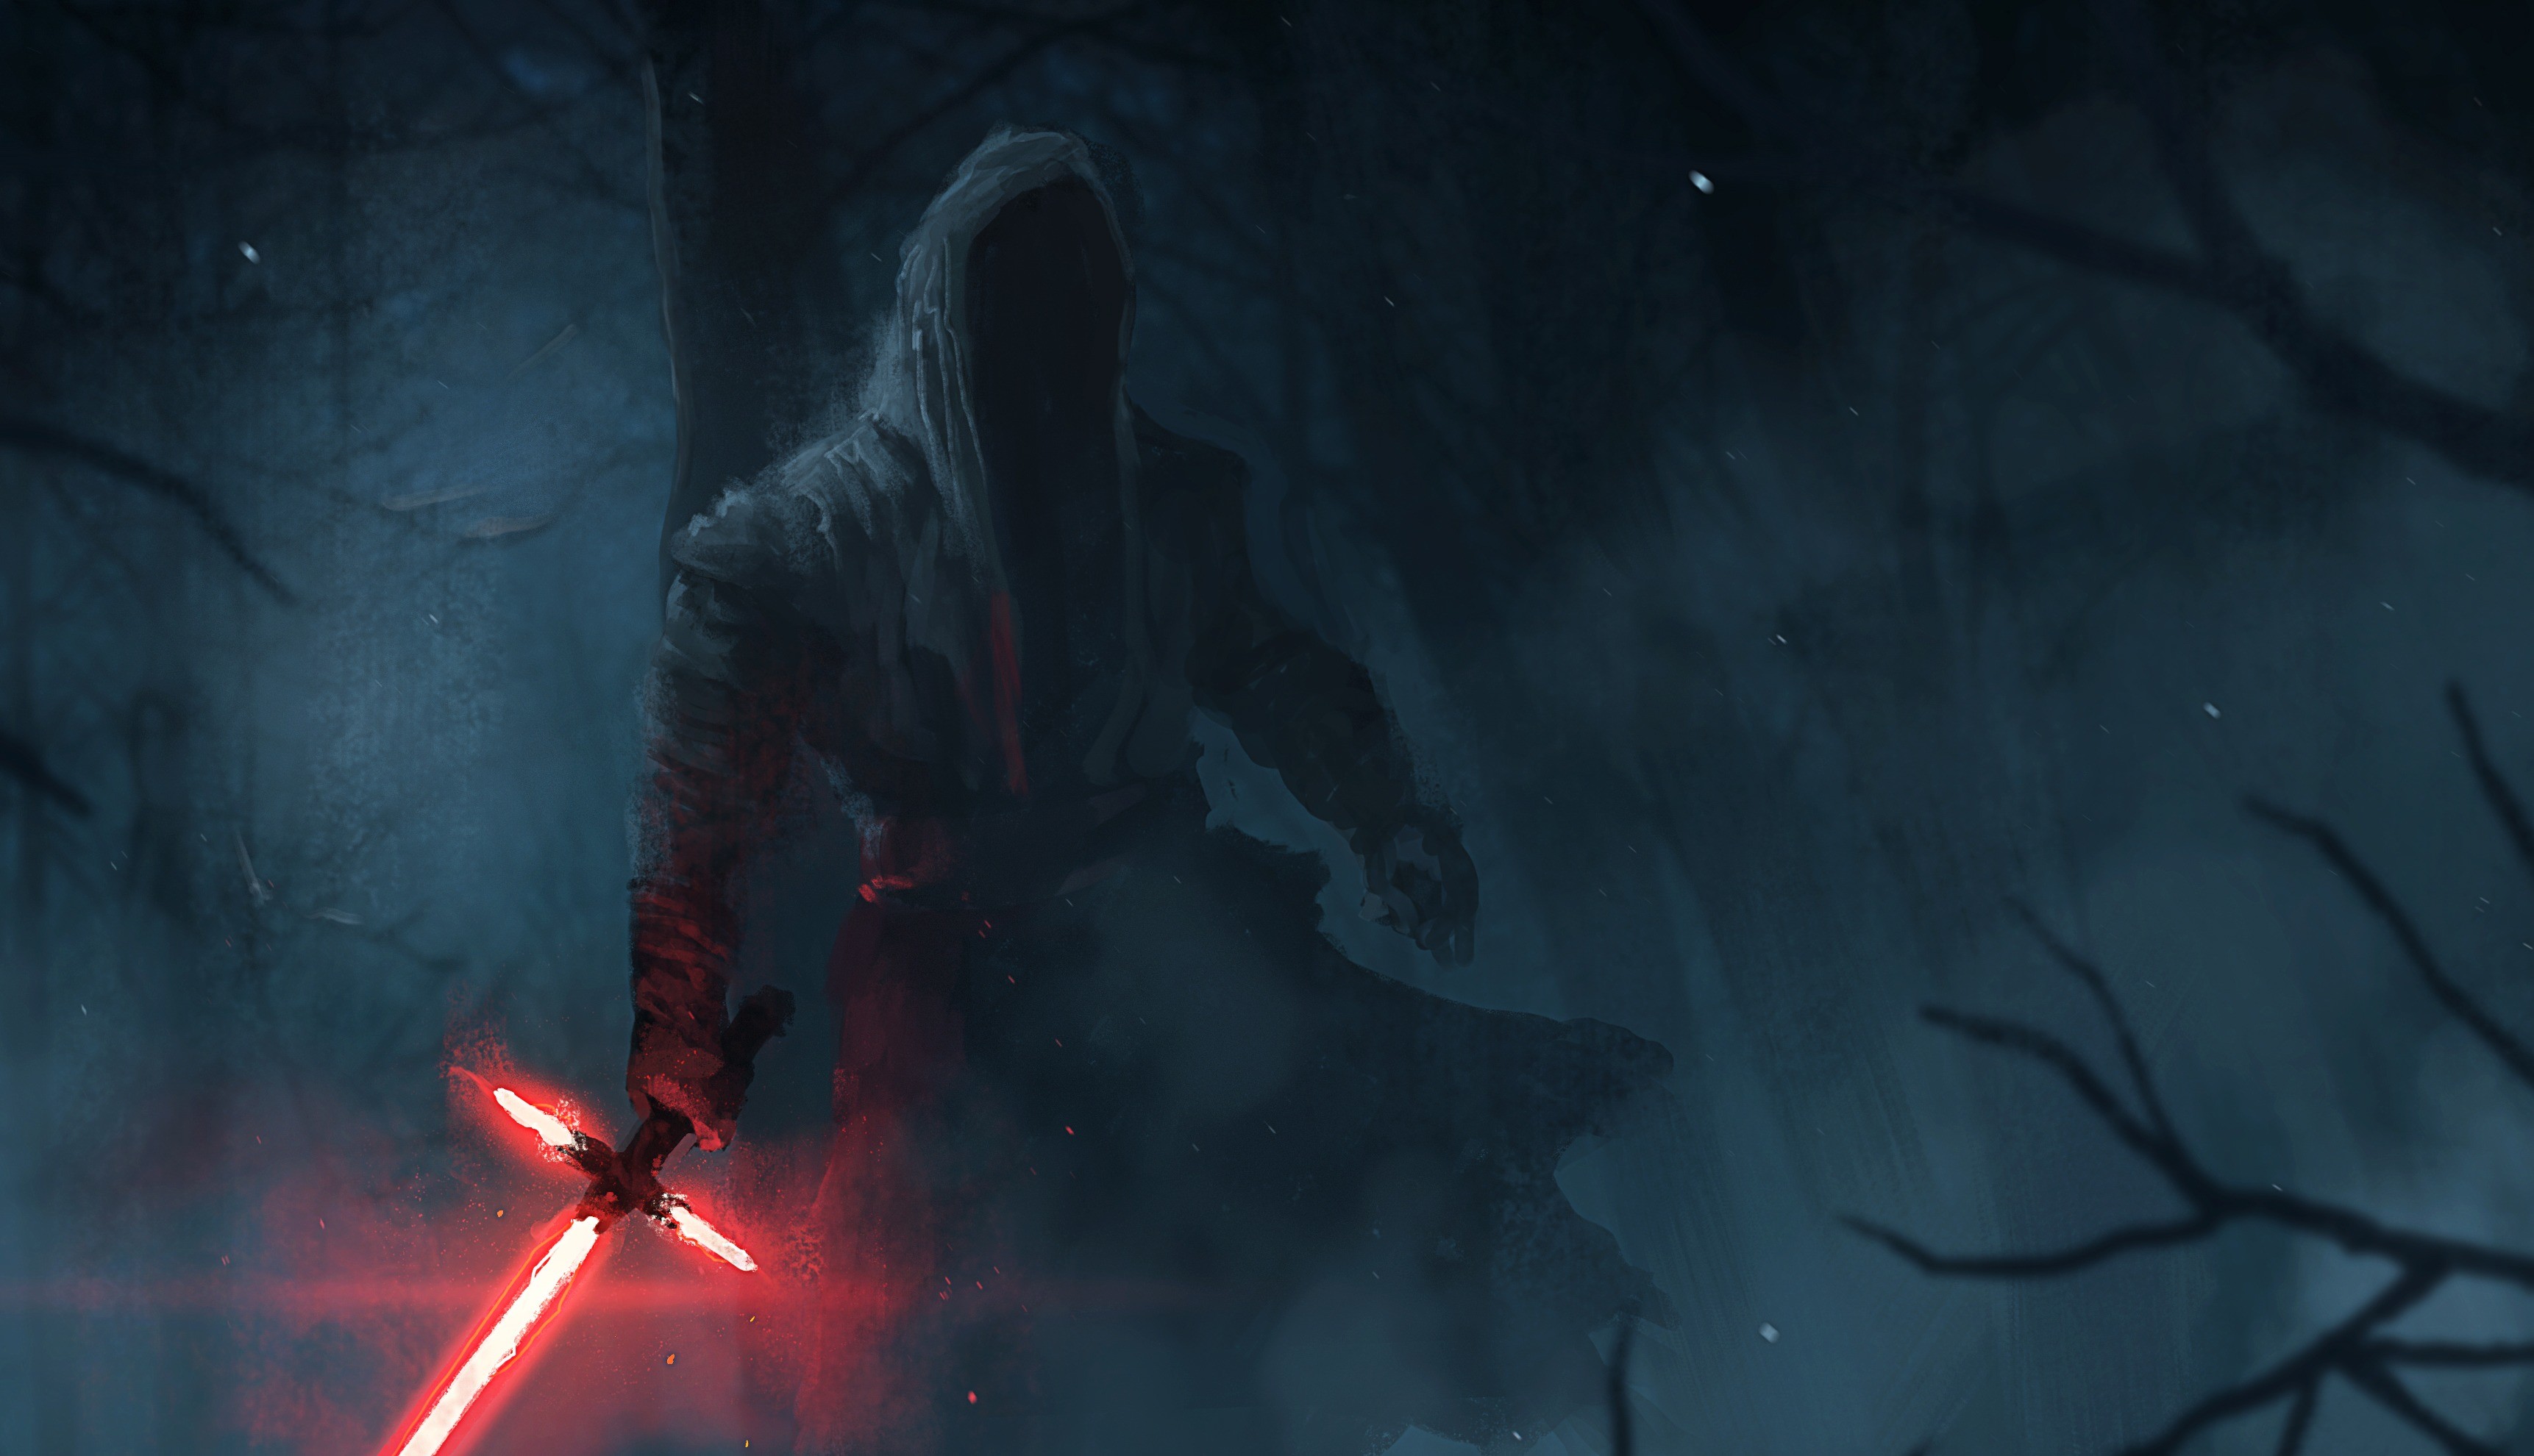 3445x1980 159 Star Wars Episode VII: The Force Awakens HD Wallpapers | Backgrounds -  Wallpaper Abyss - Page 4